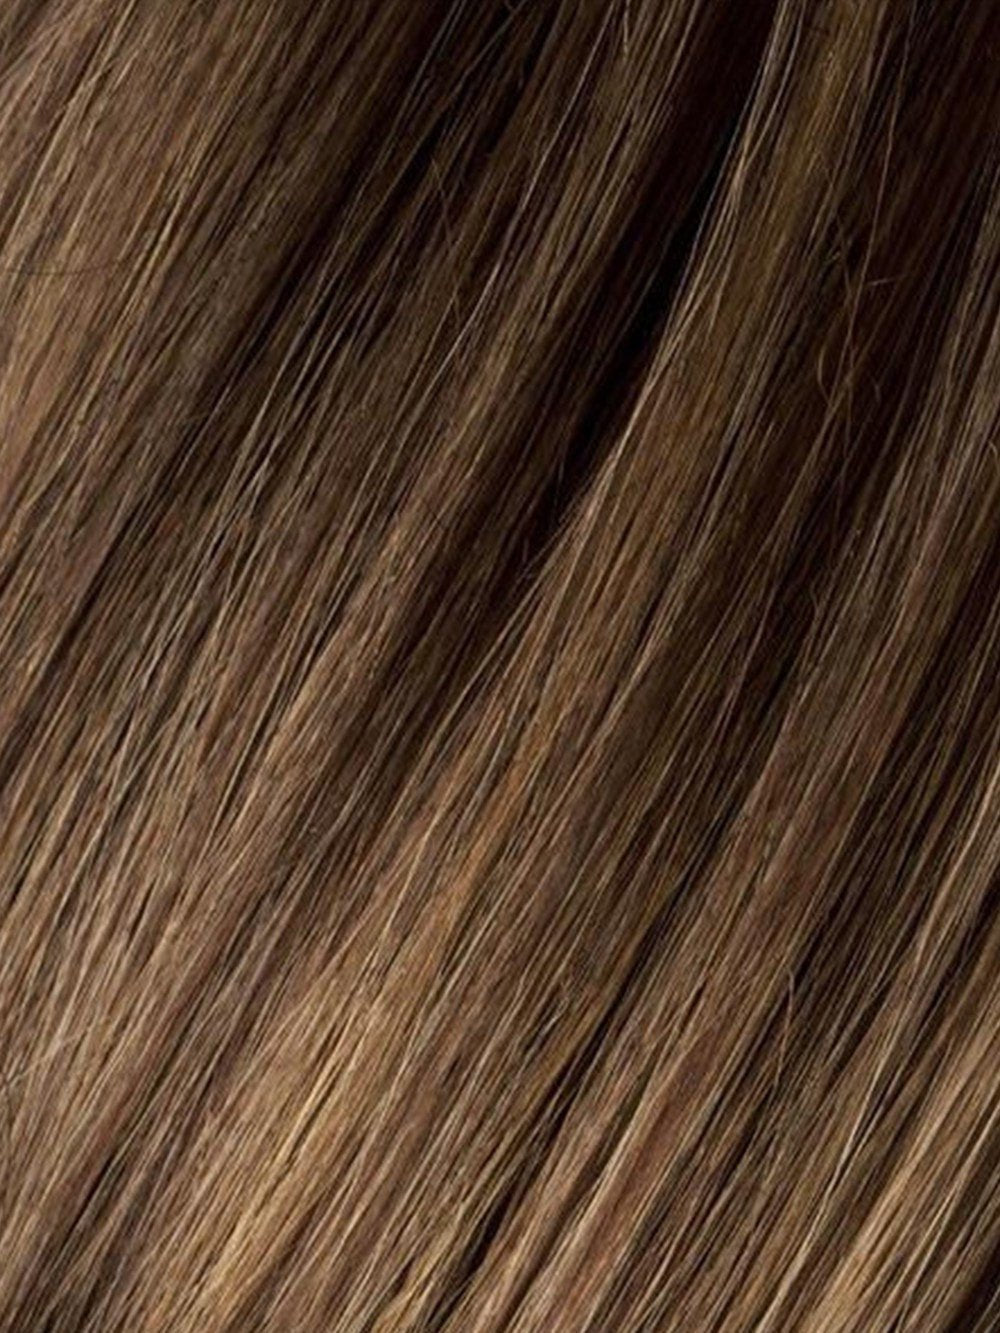 Mocca Rooted (830.31.33) | Medium Brown, Light Brown, and Light Auburn blend with Dark Roots